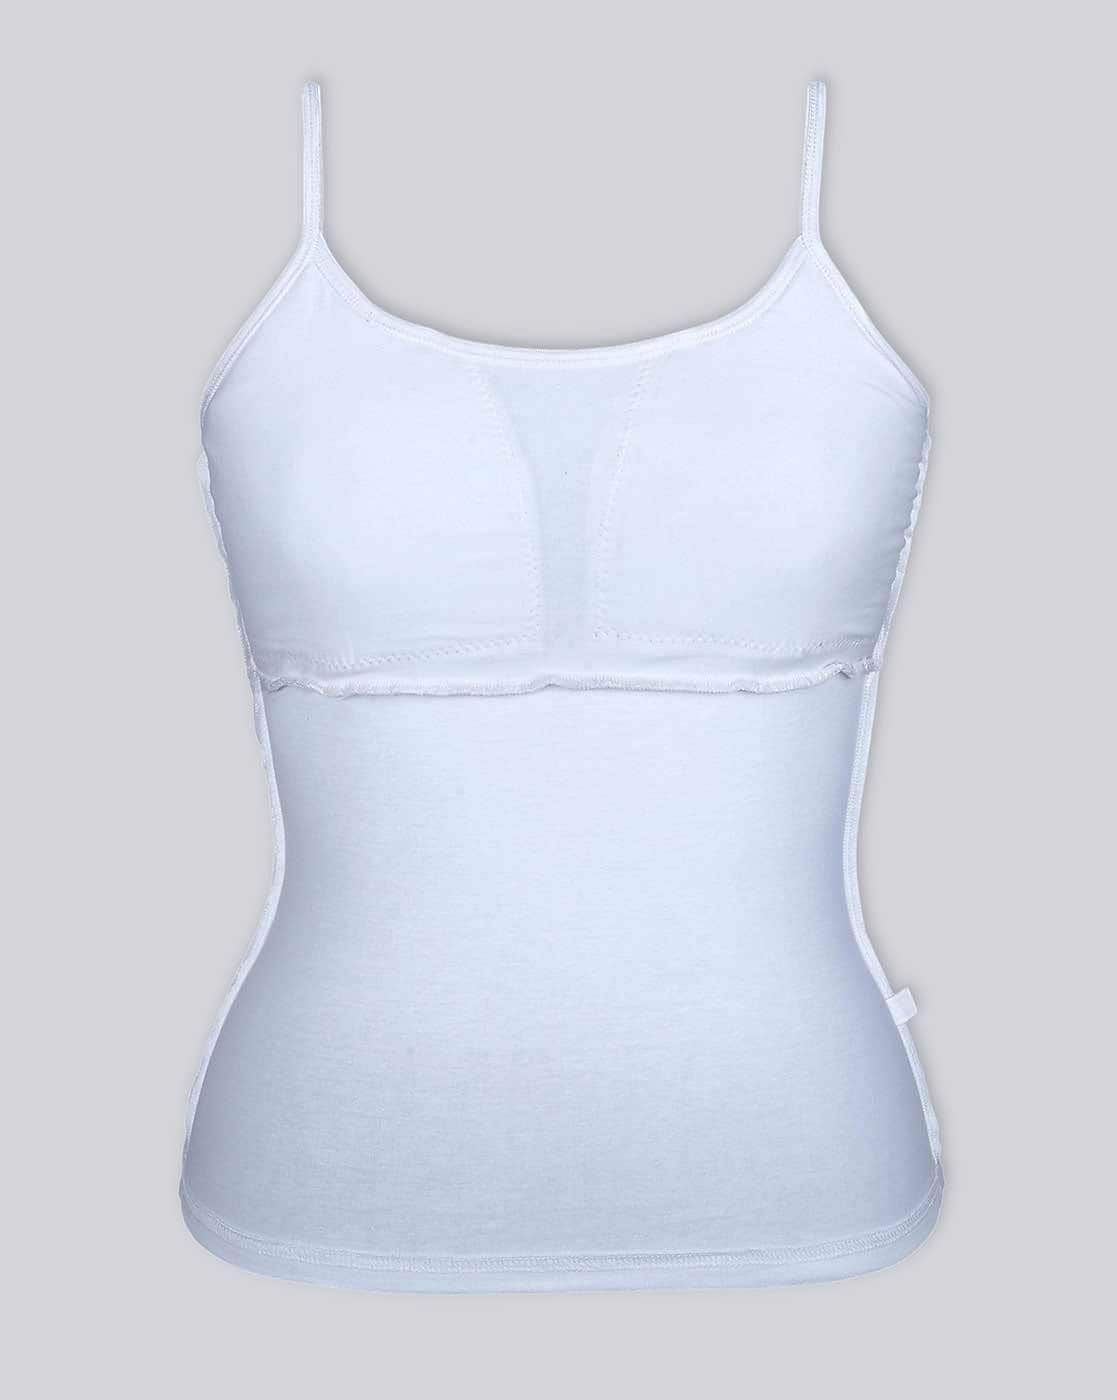 DChica Padded Camisole Bra for Girls, Teen & Young Women Round Neck Padded  Undershirts